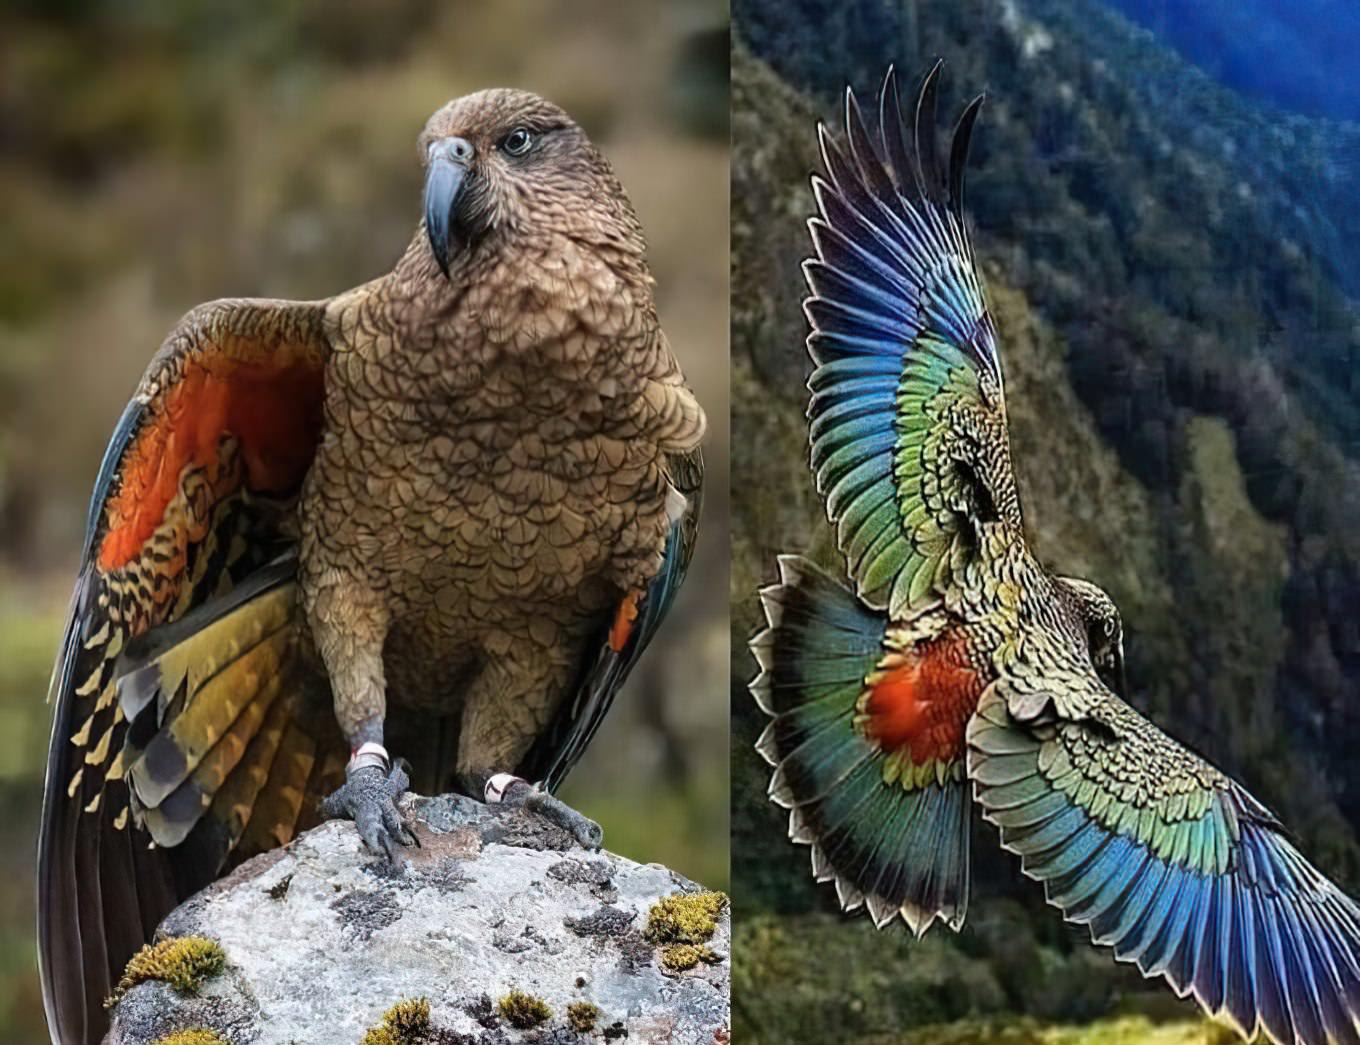 The magnificent endangered Kea from New Zealand is the only alpine parrot in the world.